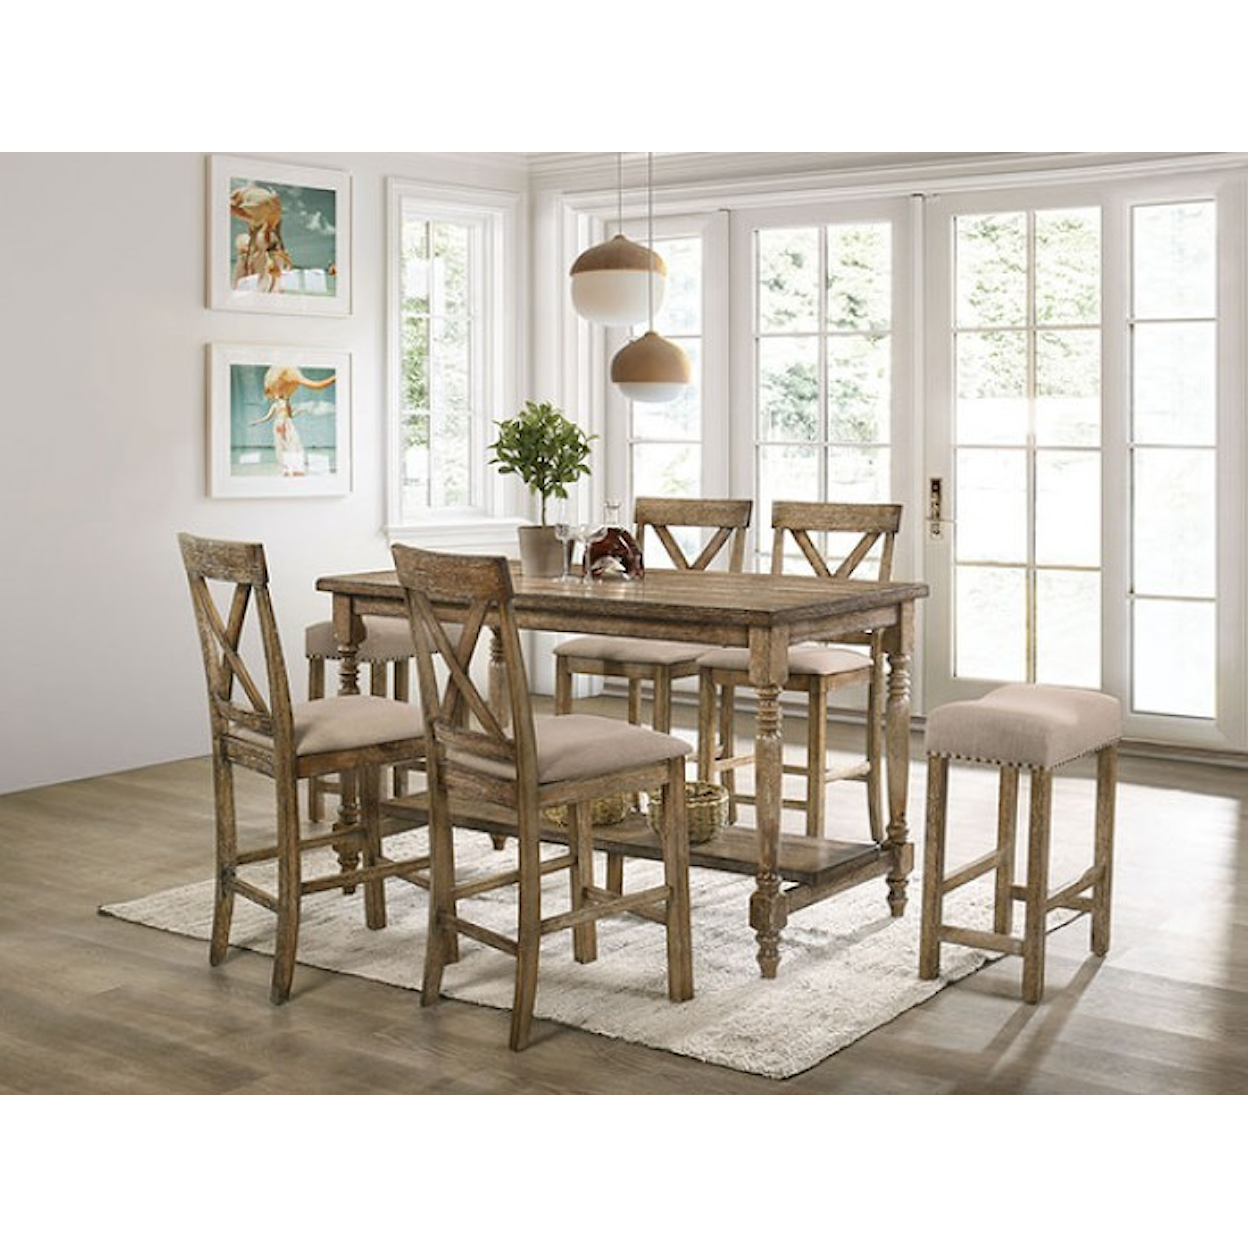 Furniture of America Plankinton 7-Piece Counter Height Dining Set